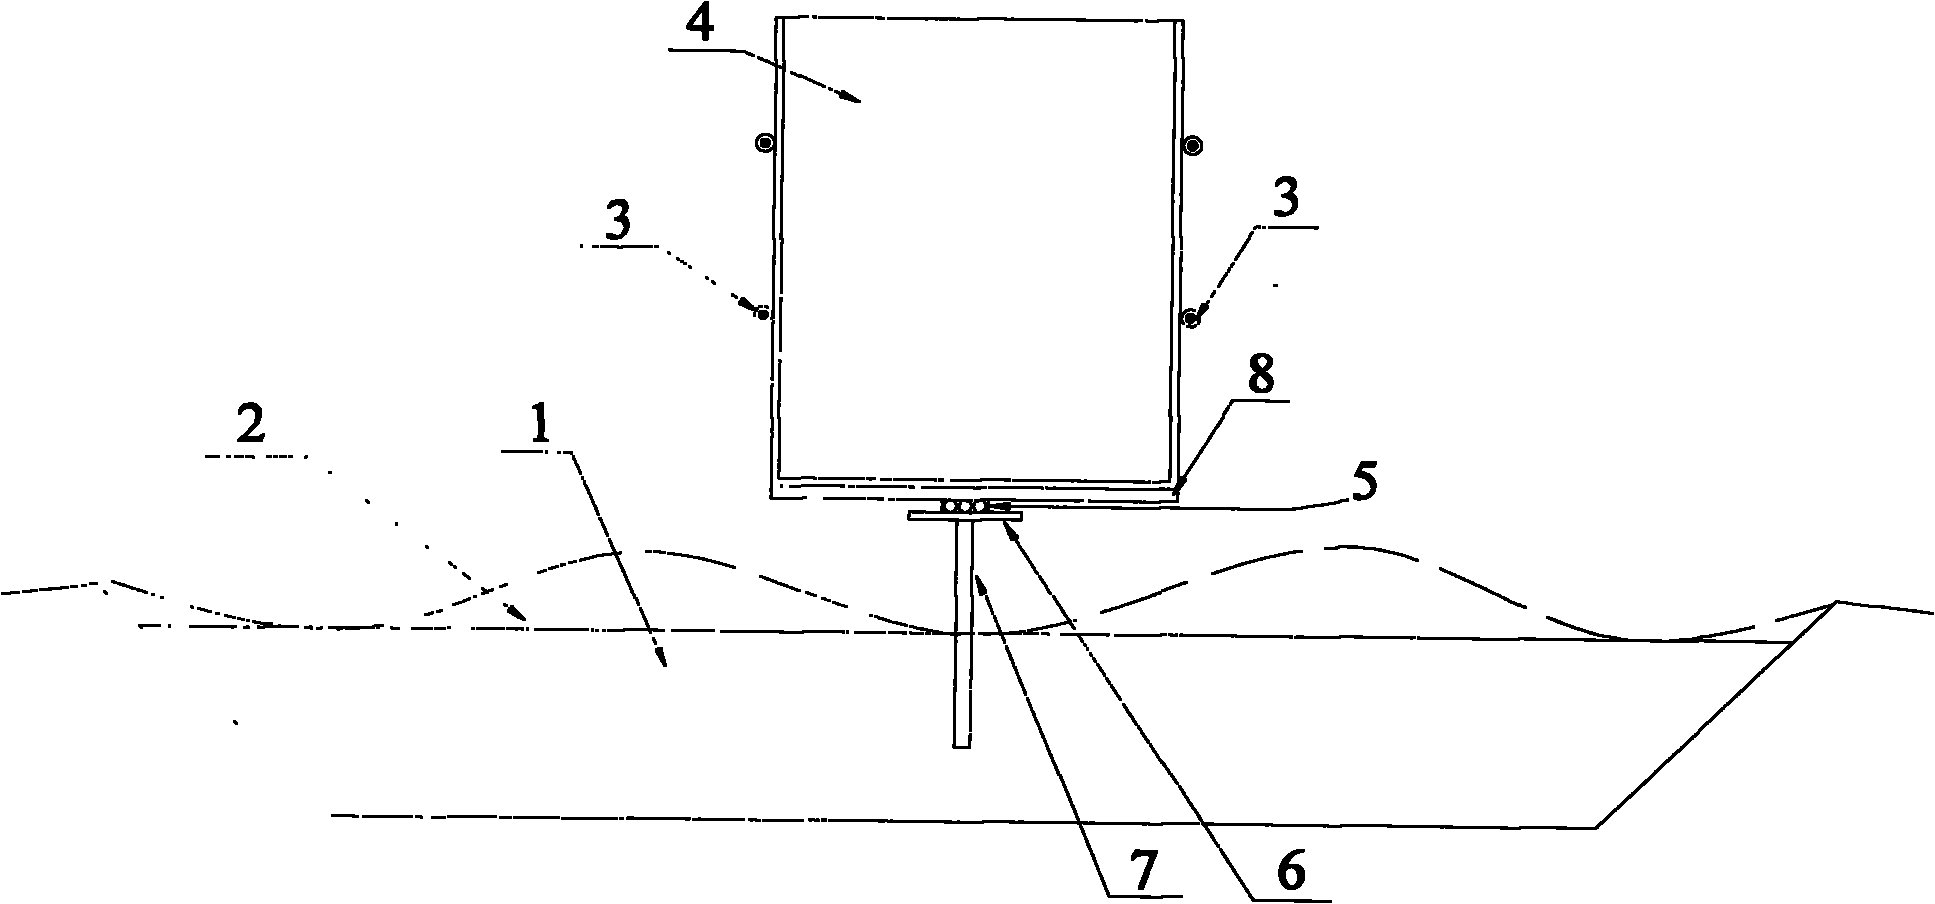 Test device for simulating washing and bearing coupled characteristic of underwater pile foundation